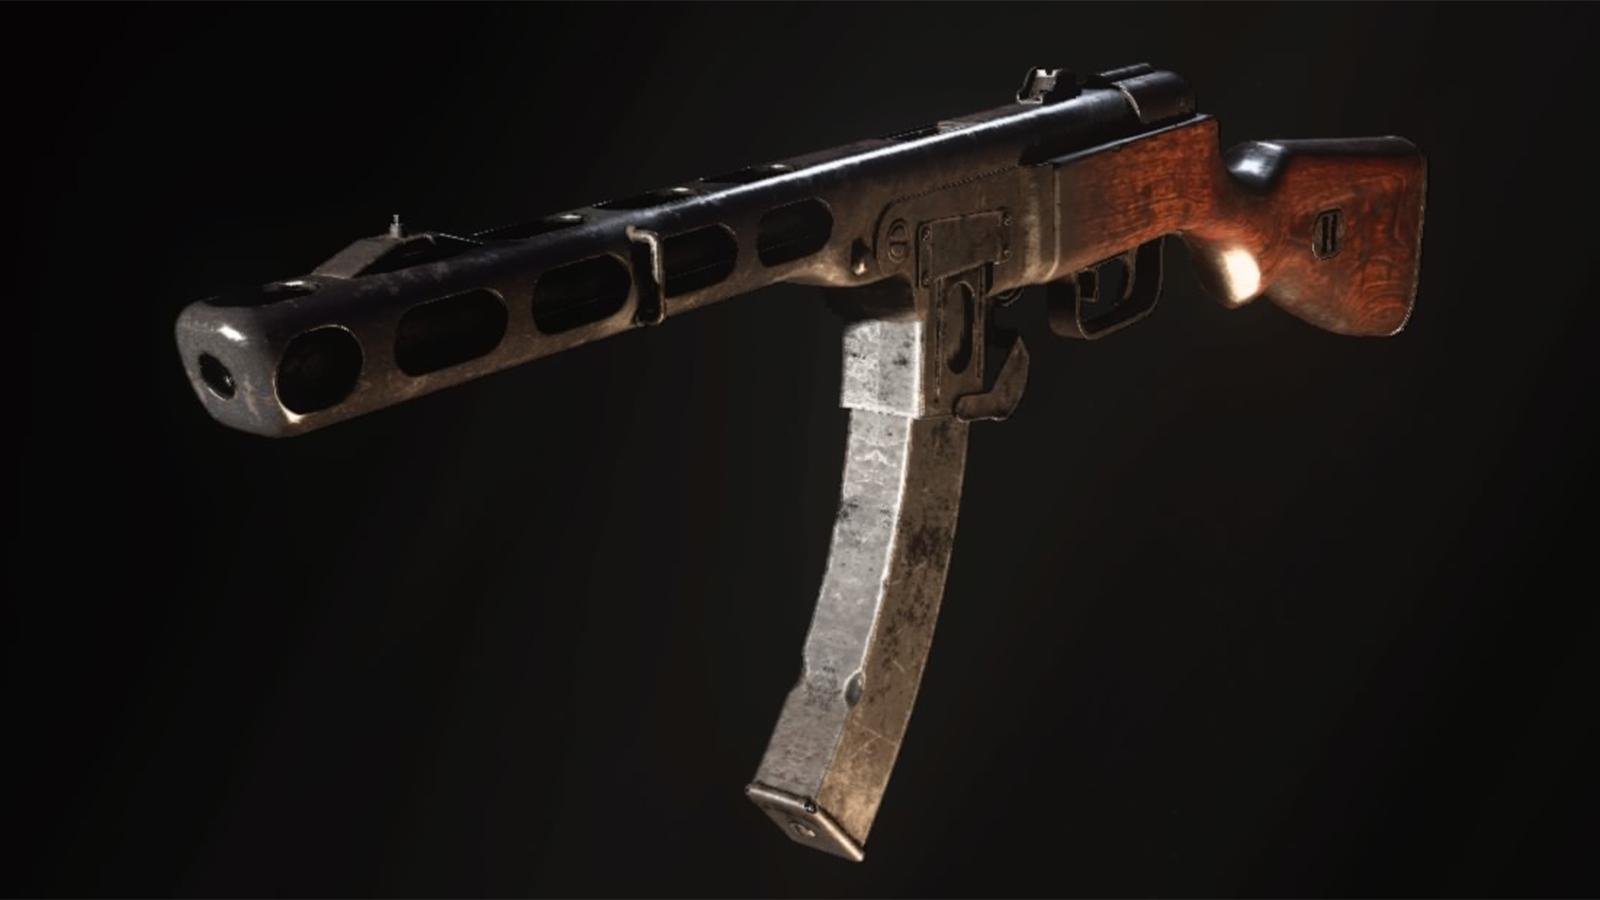 The PPSh-41 in Call of Duty on a black background